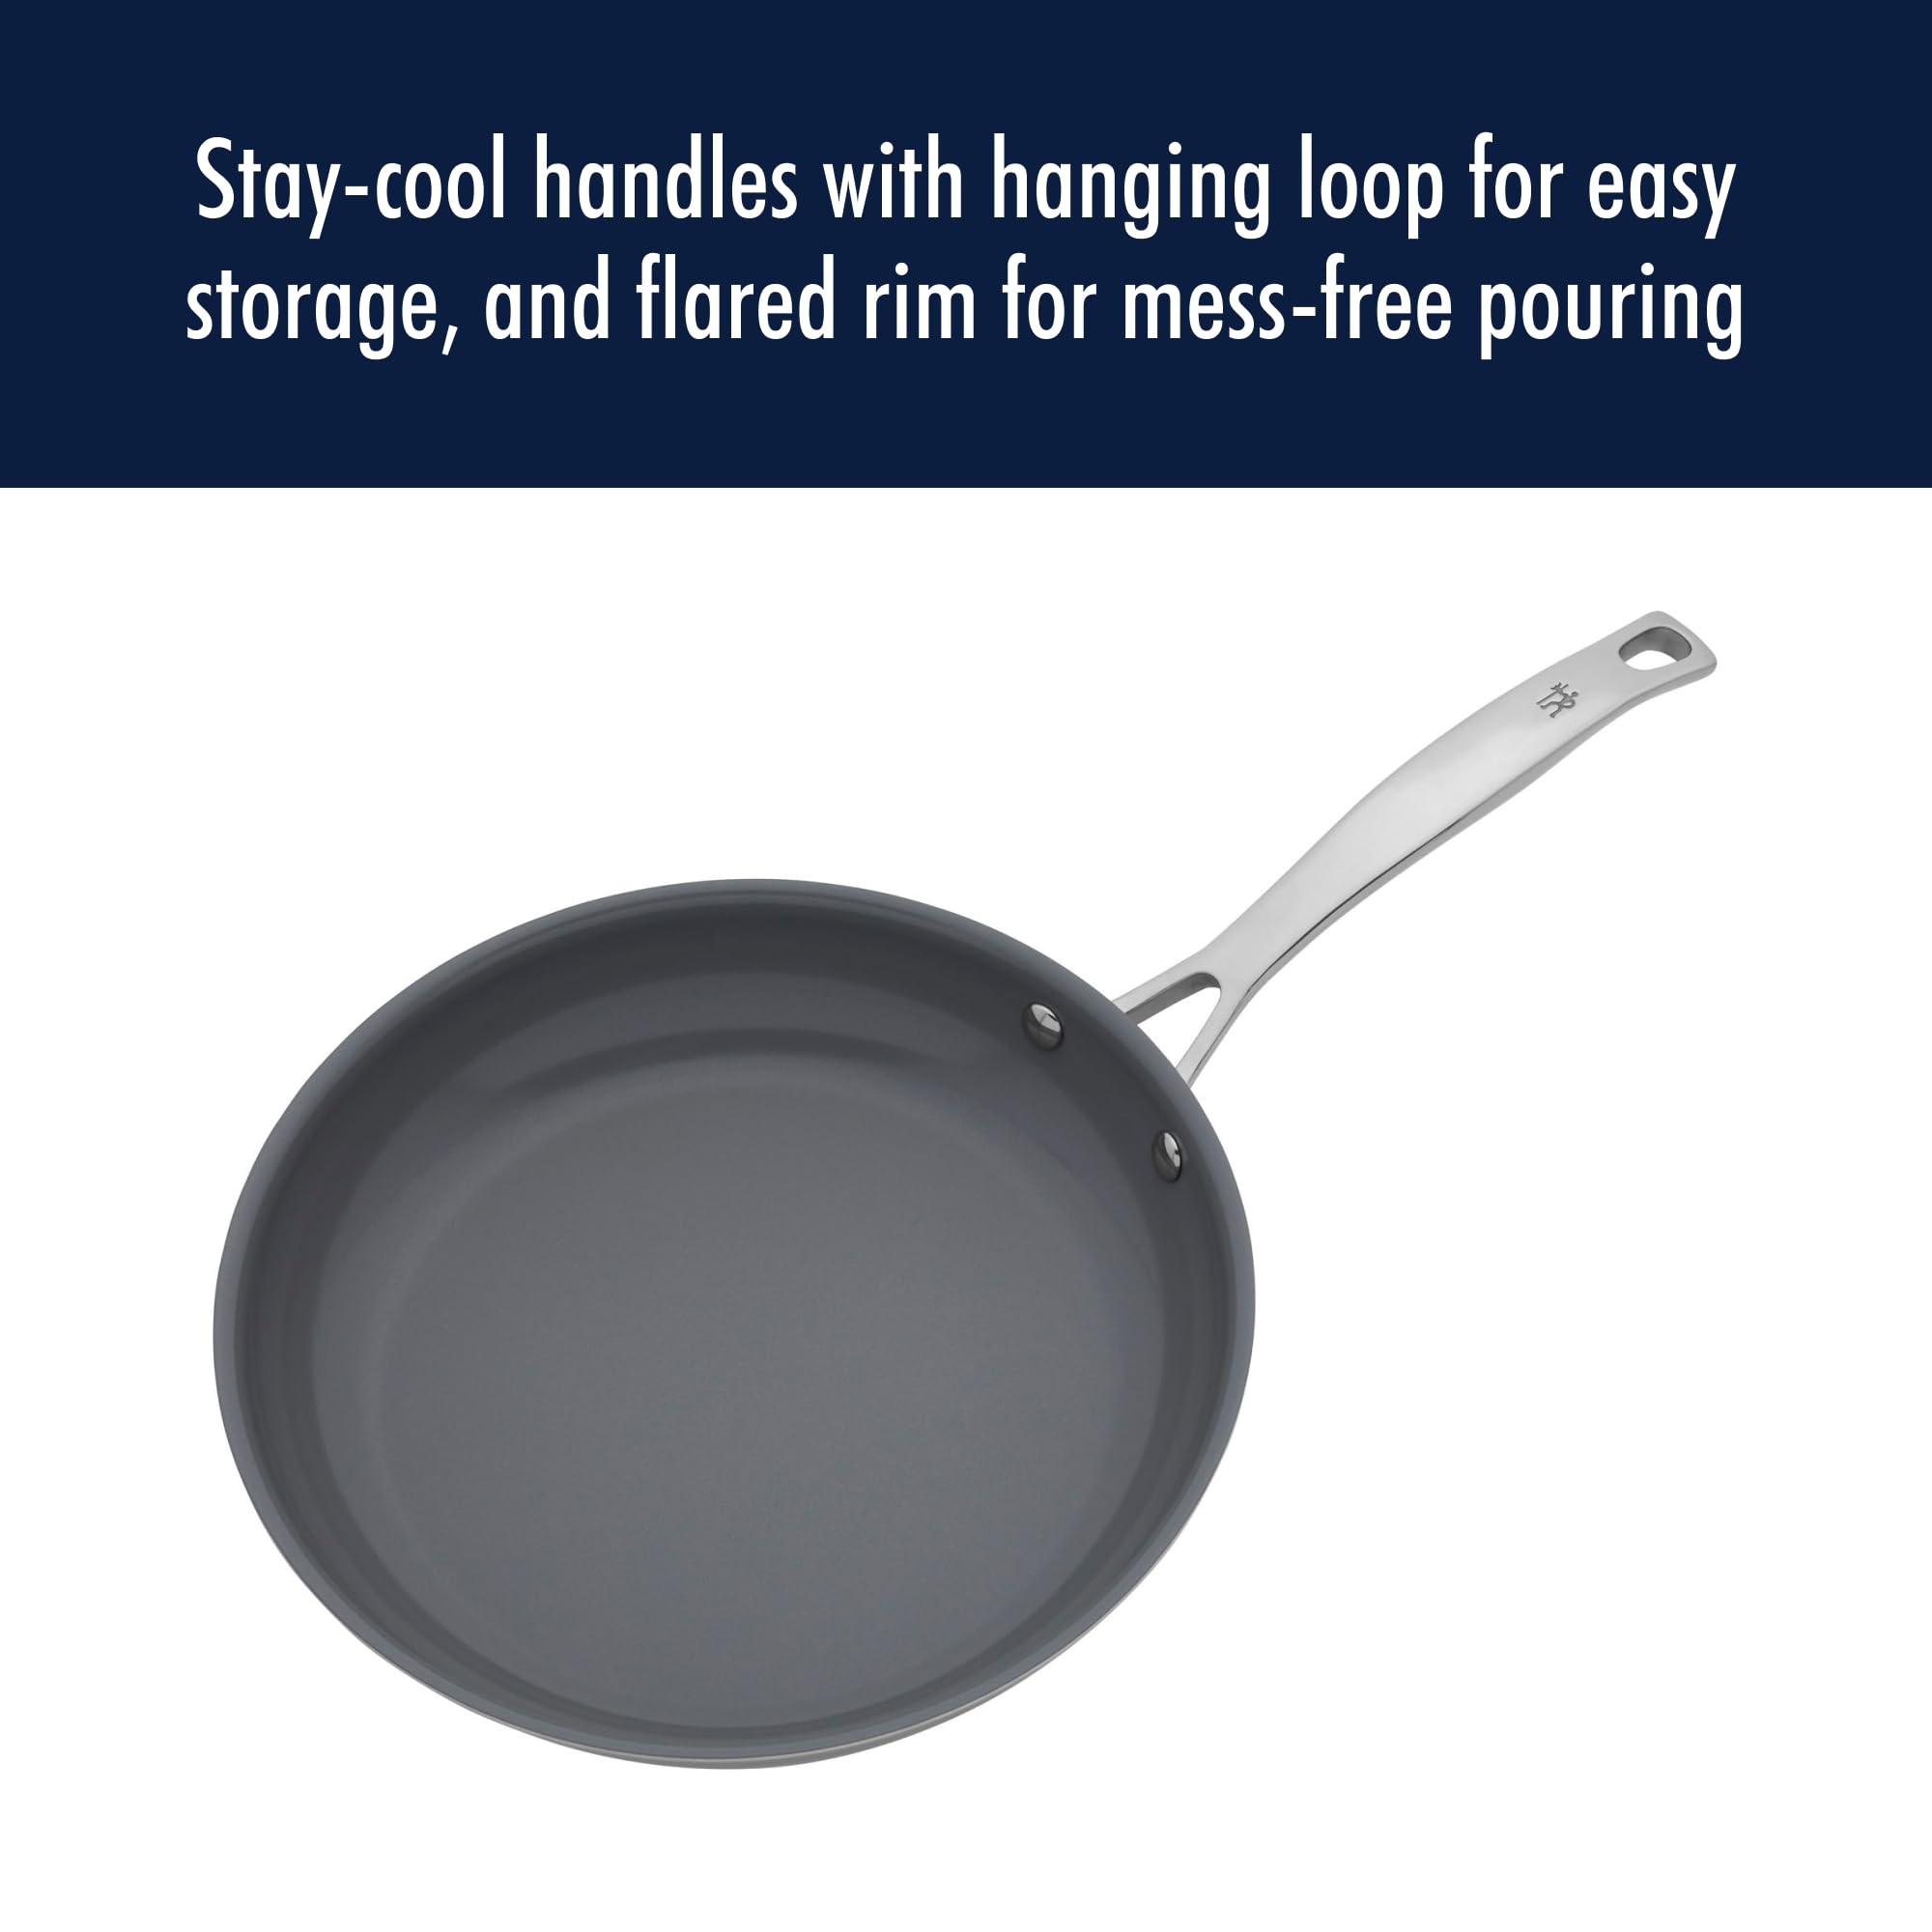 HENCKELS Clad H3 10-pc Induction Ceramic Nonstick Pot and Pan Set, Stainless Steel, Durable and Easy to clean